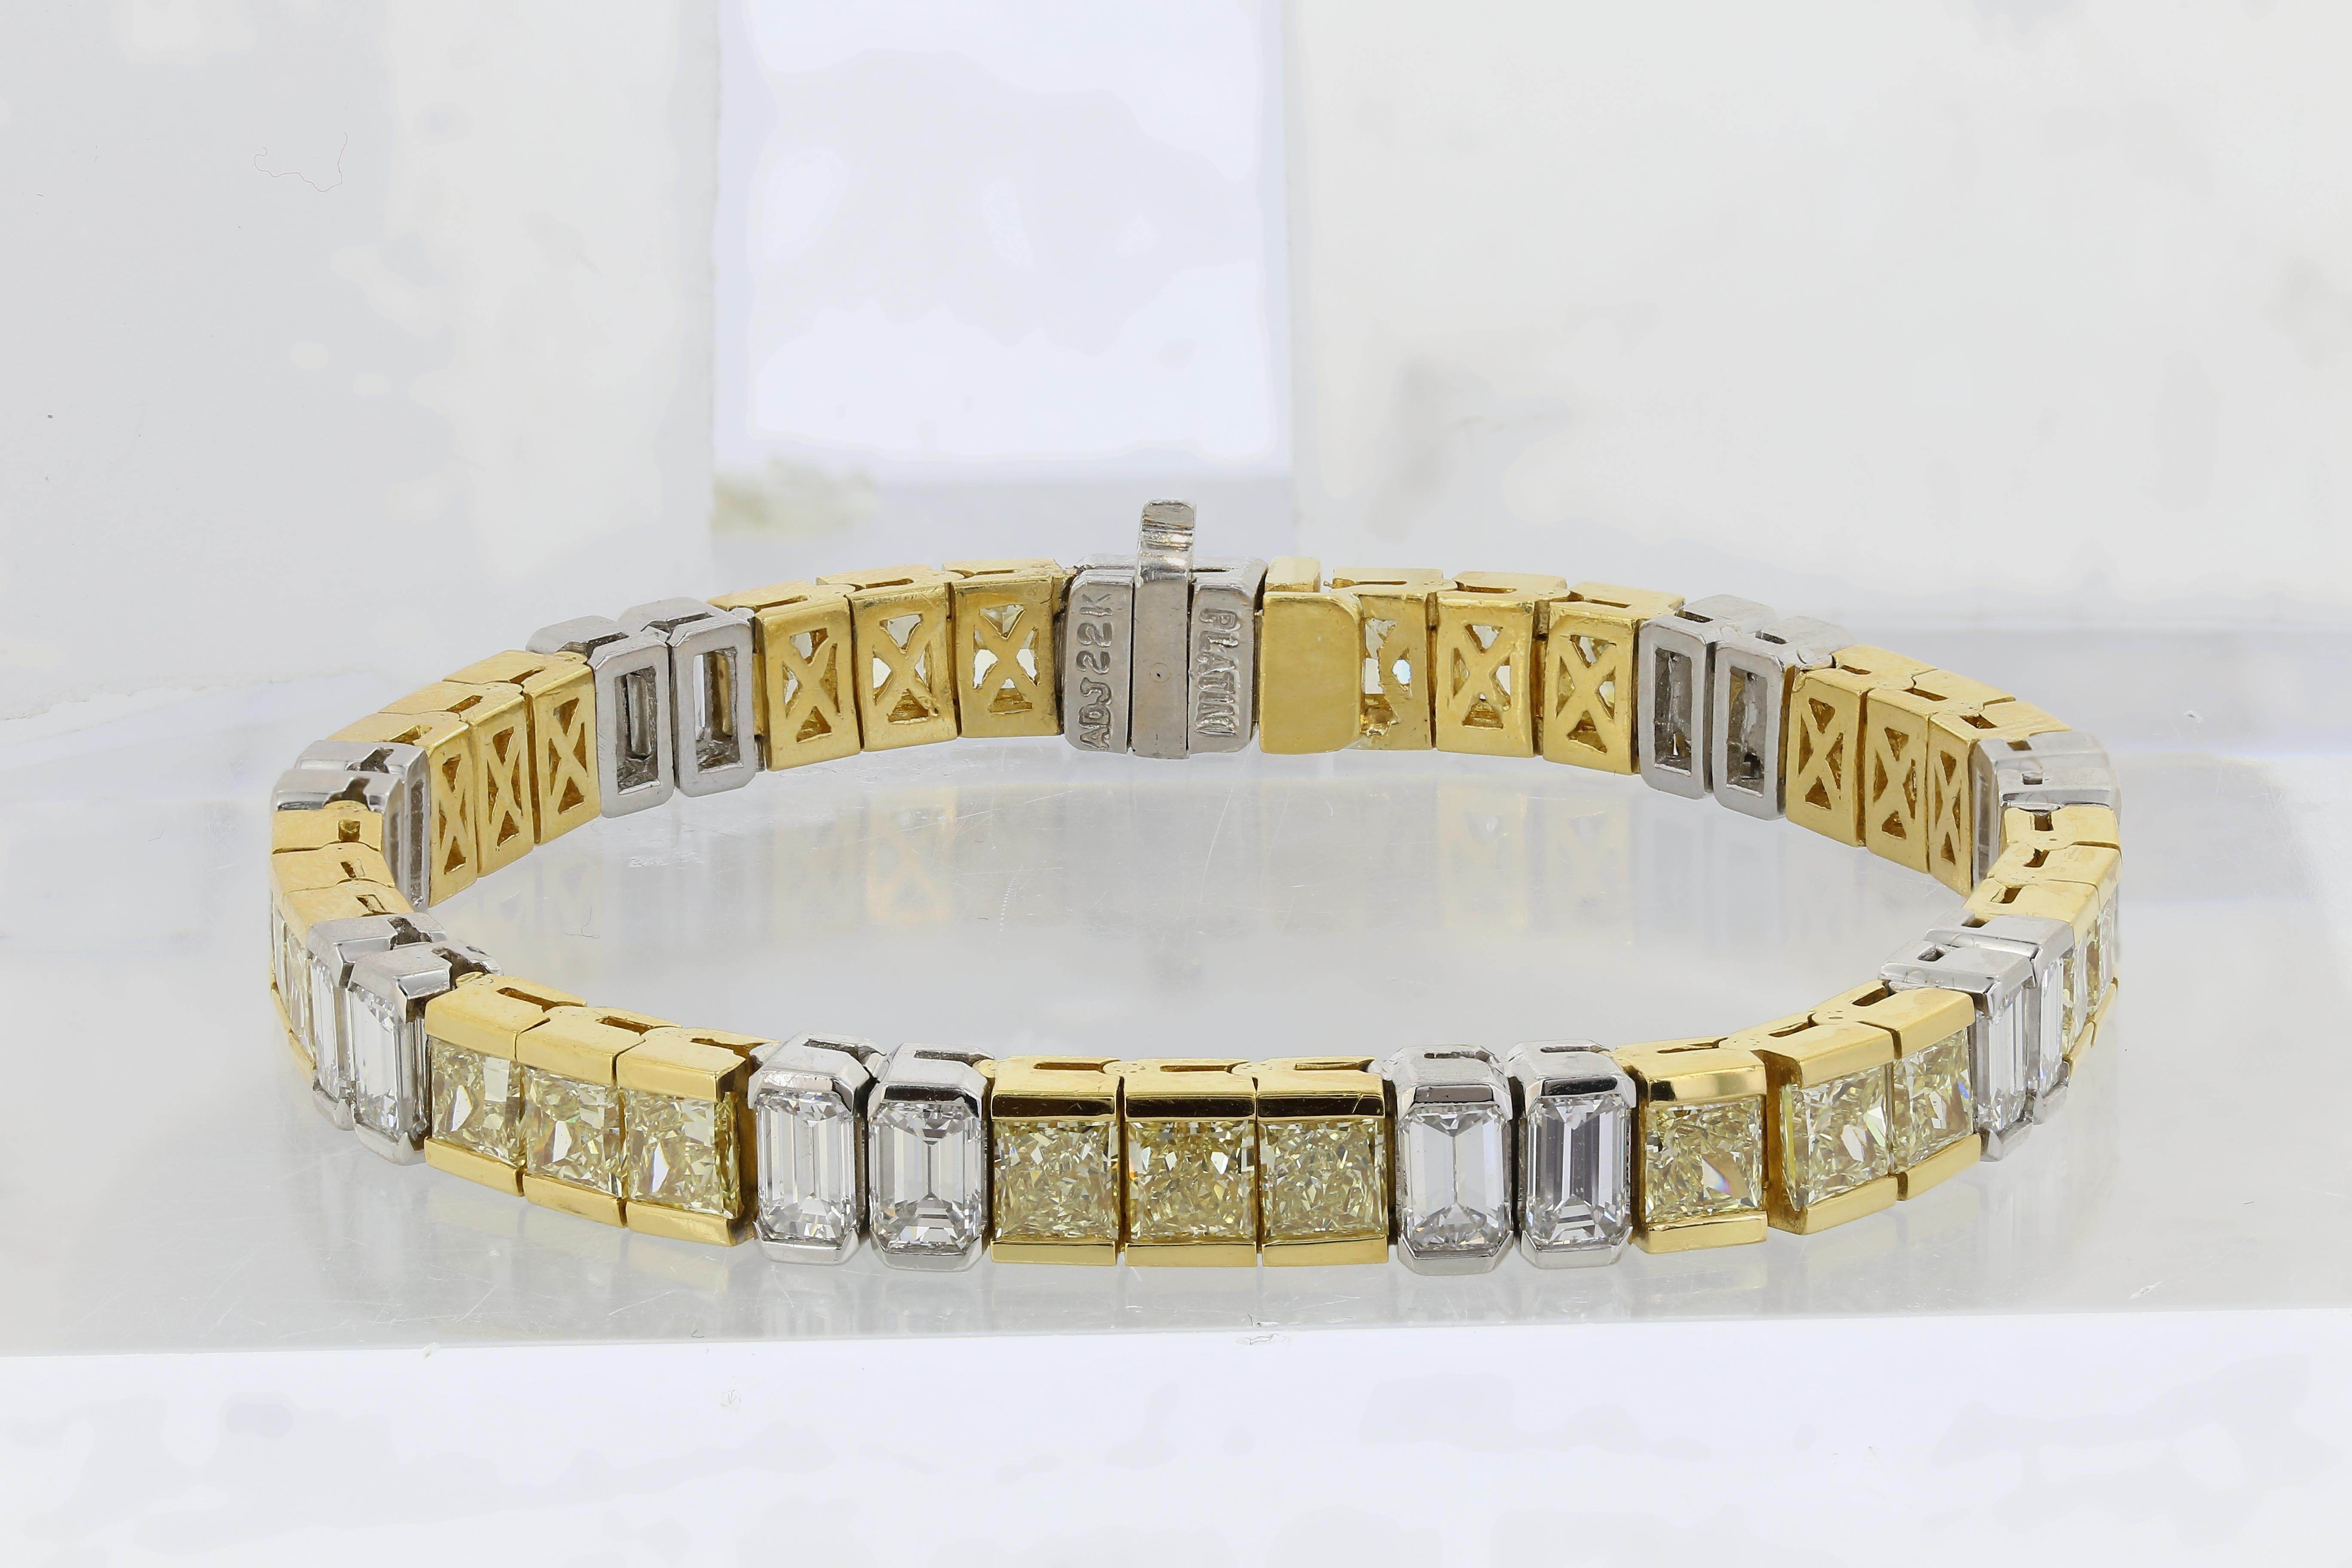 Stunning 18 karat yellow gold and platinum custom made Canary diamond block bracelet, consisting of approximately 13.00 carats of fancy intense yellow radiant cut diamonds with a clarity of VS1-VS2,  set with 18 emerald cut diamonds having a total